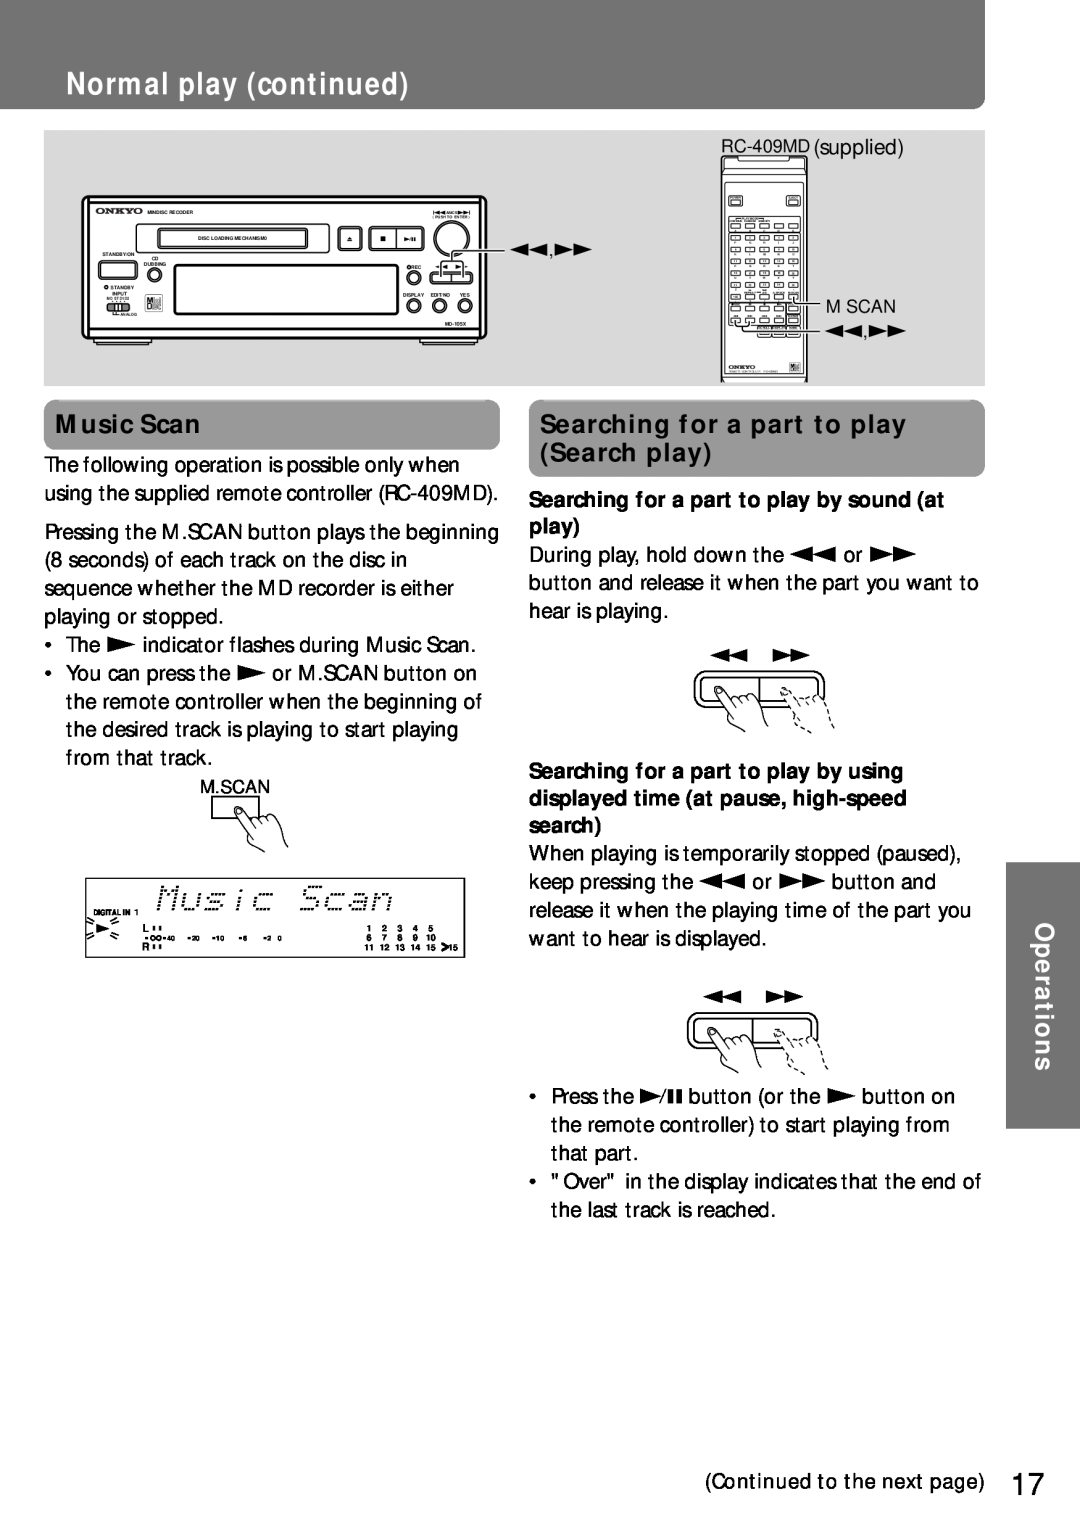 Onkyo MD-105X manual Music Scan, Searching for a part to play Search play, Operations, Normal play continued 